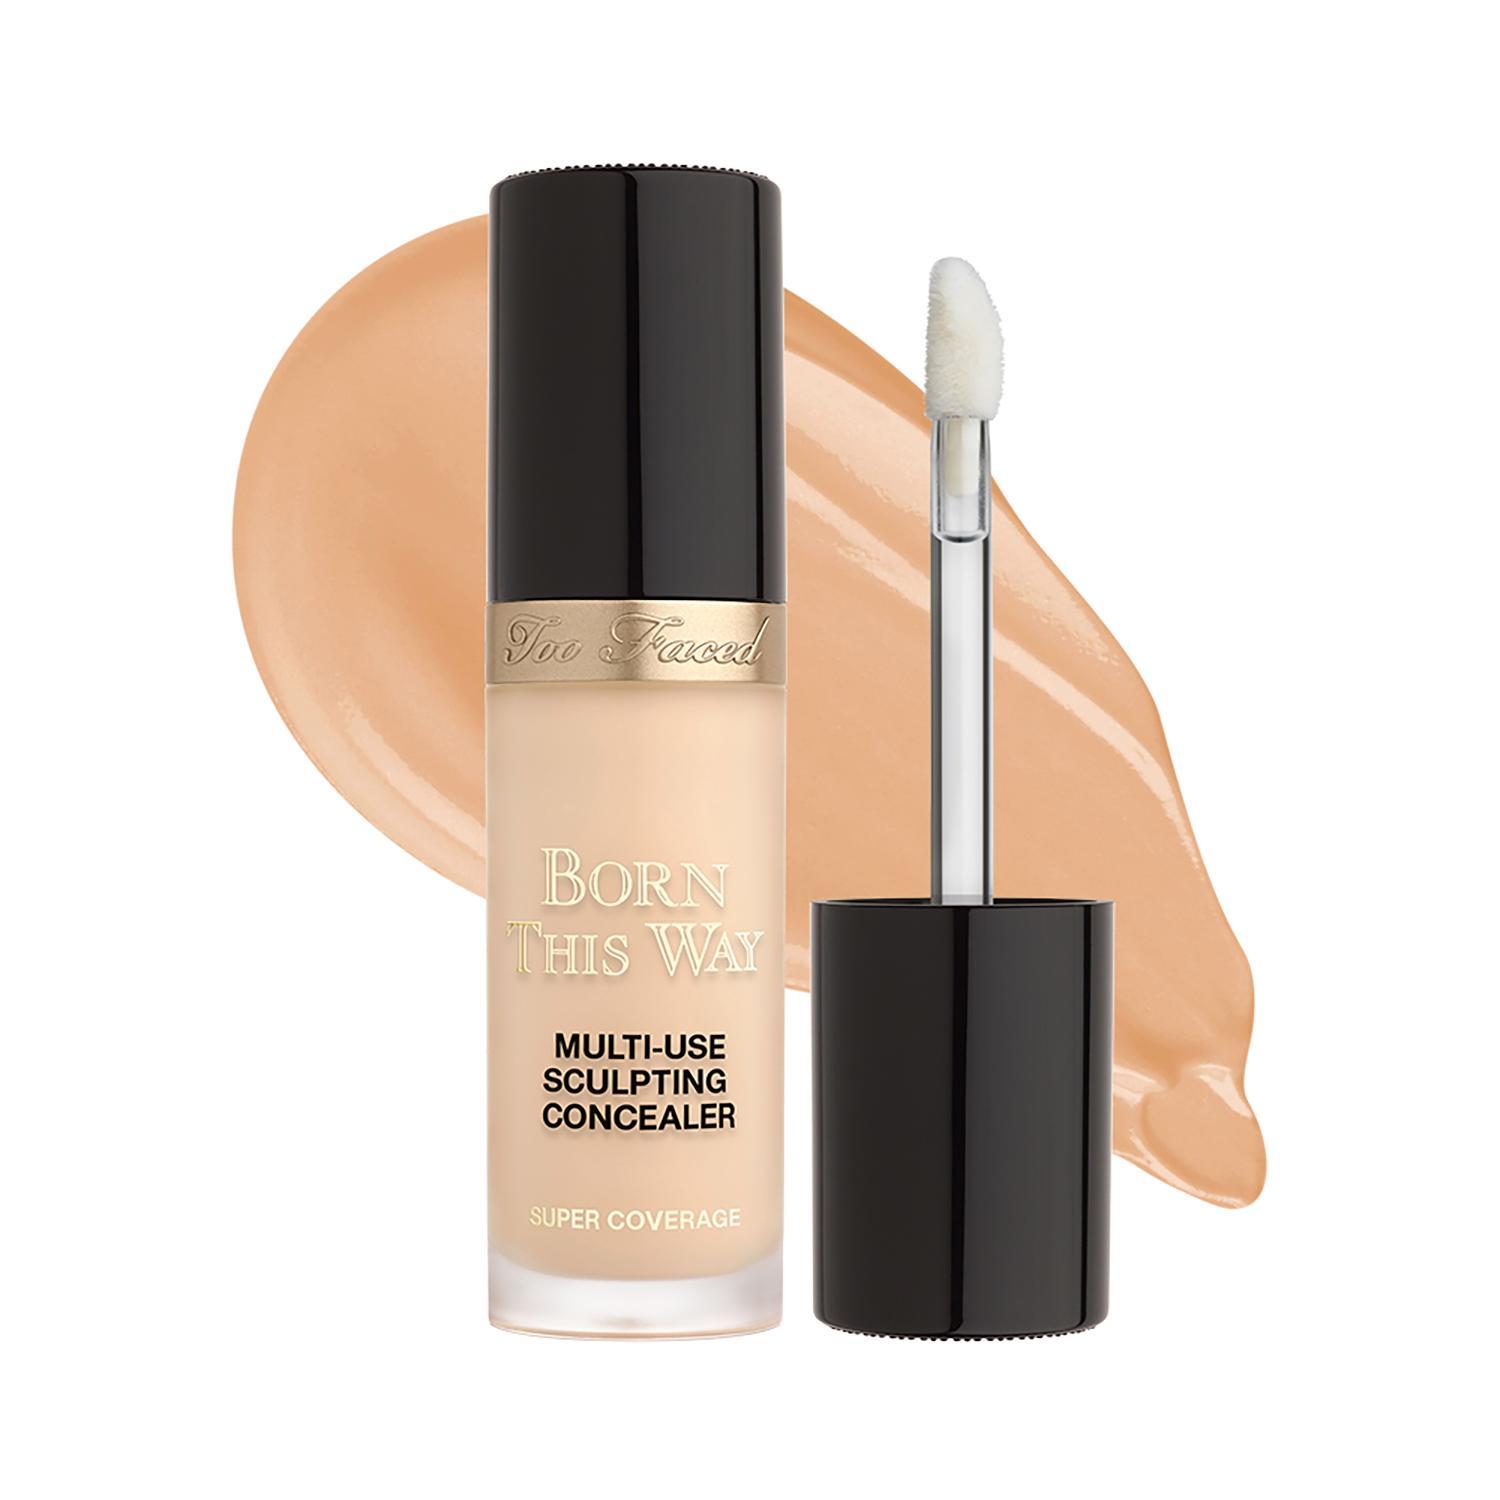 too faced born this way super coverage multi use sculpting concealer- nude (13.5ml)